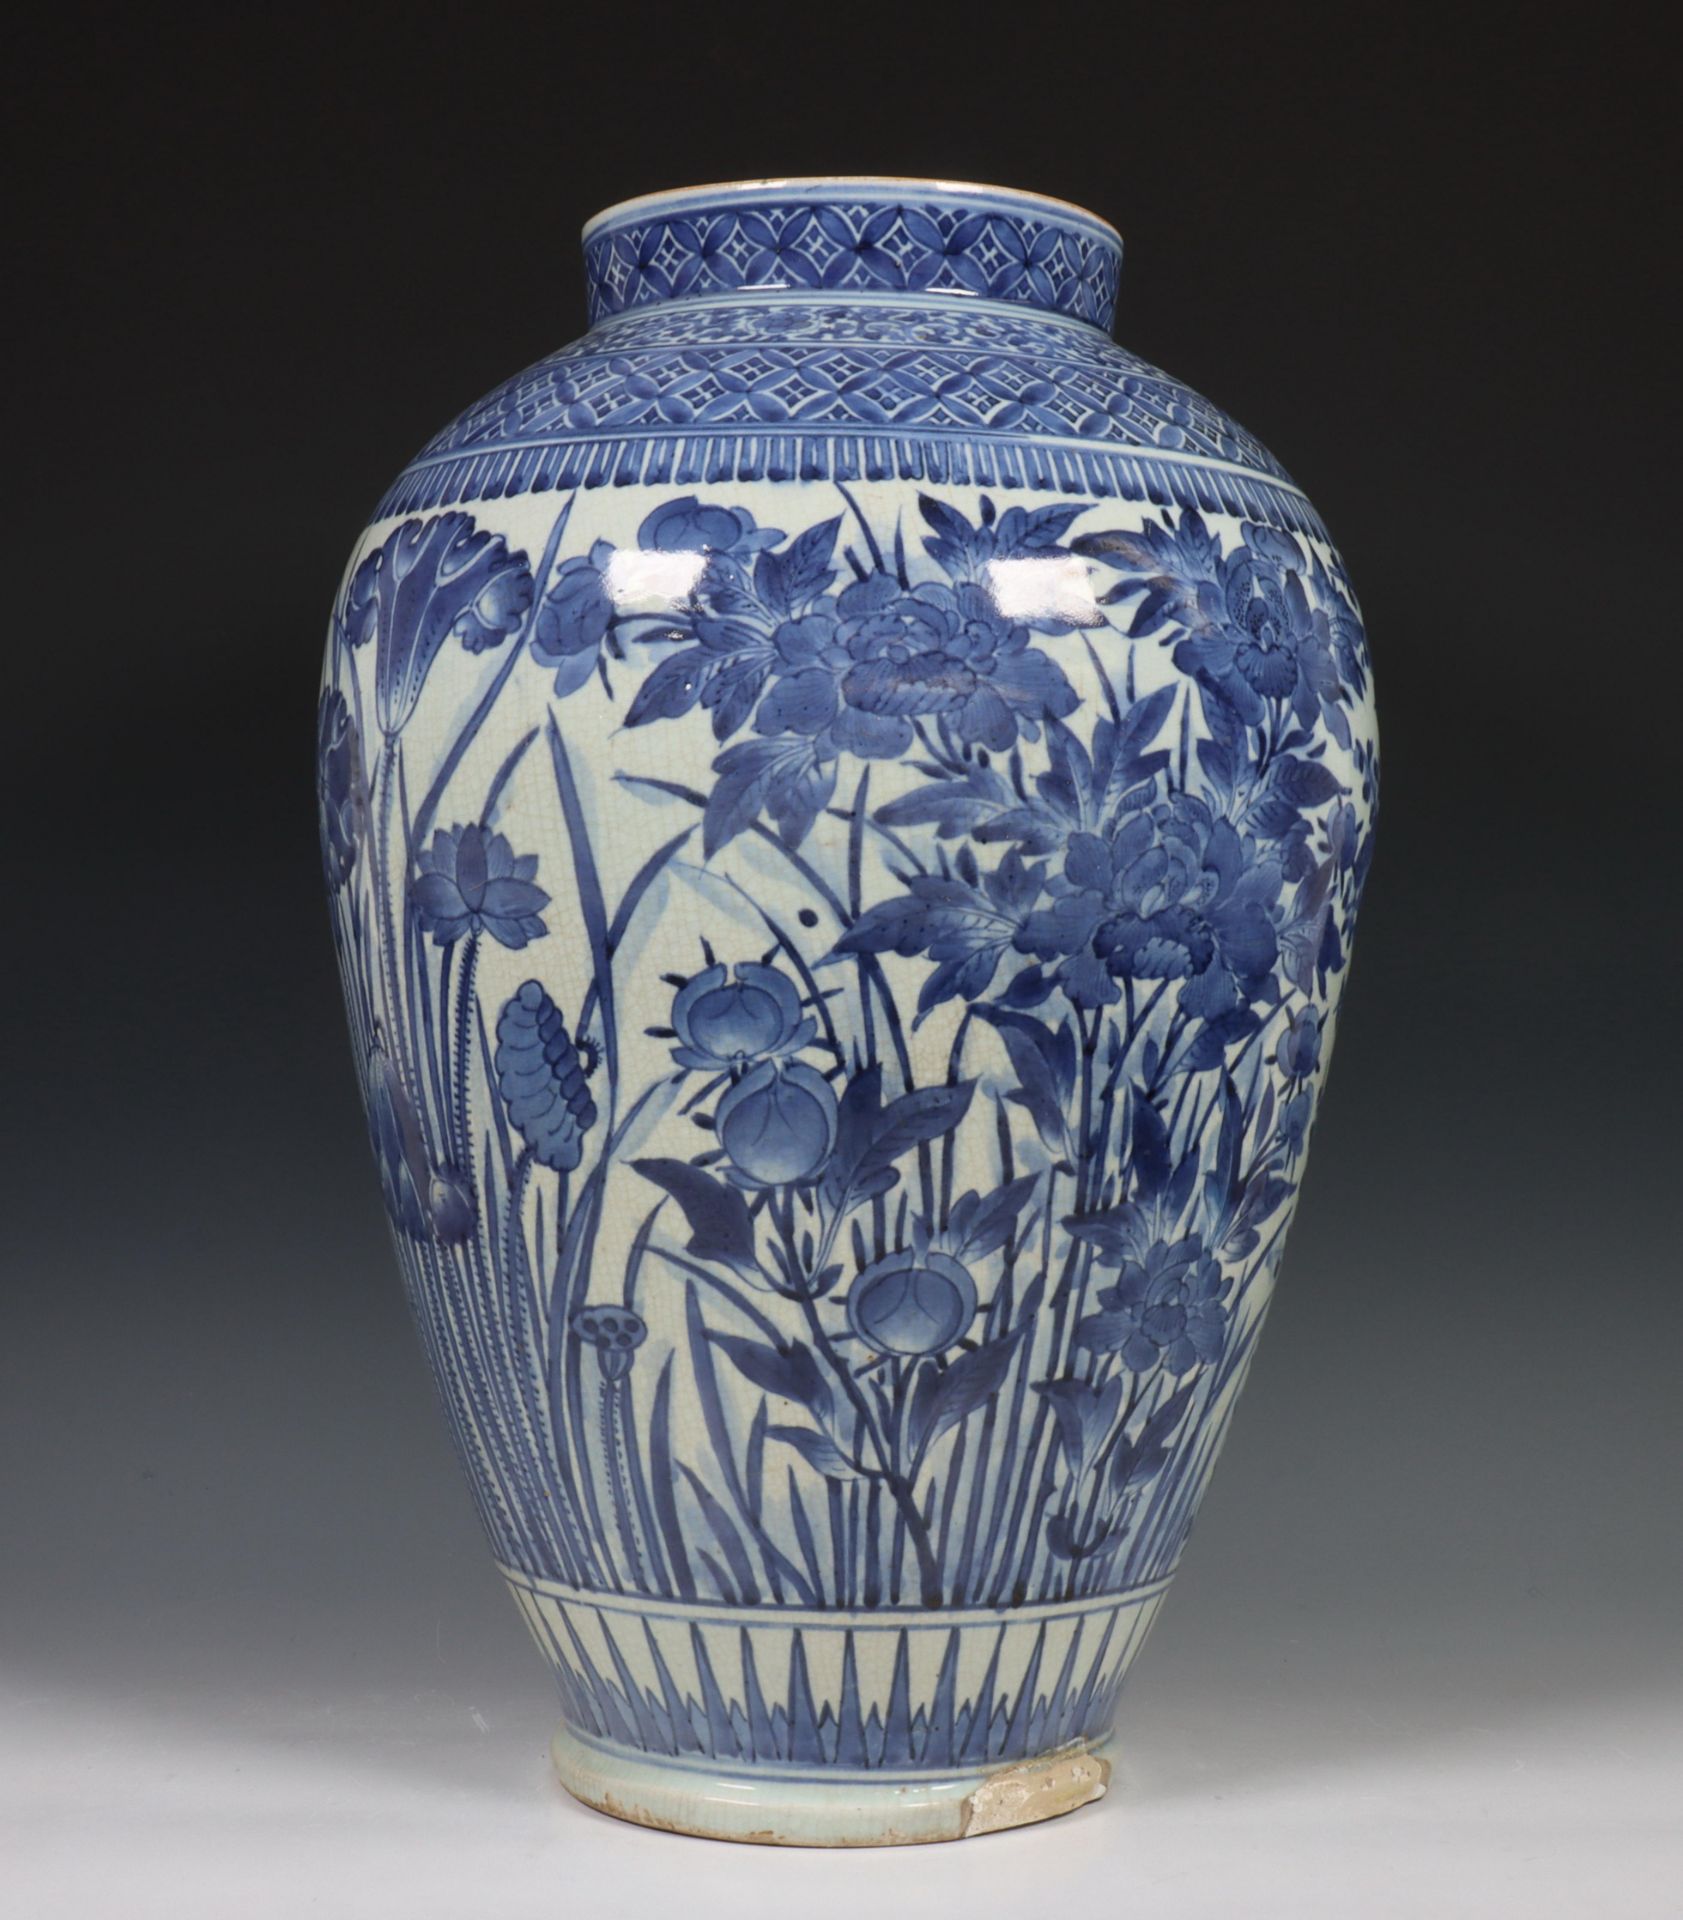 Japan, blue and white porcelain baluster vase, Meiji period, 19th century, decorated with prunus, - Image 9 of 11